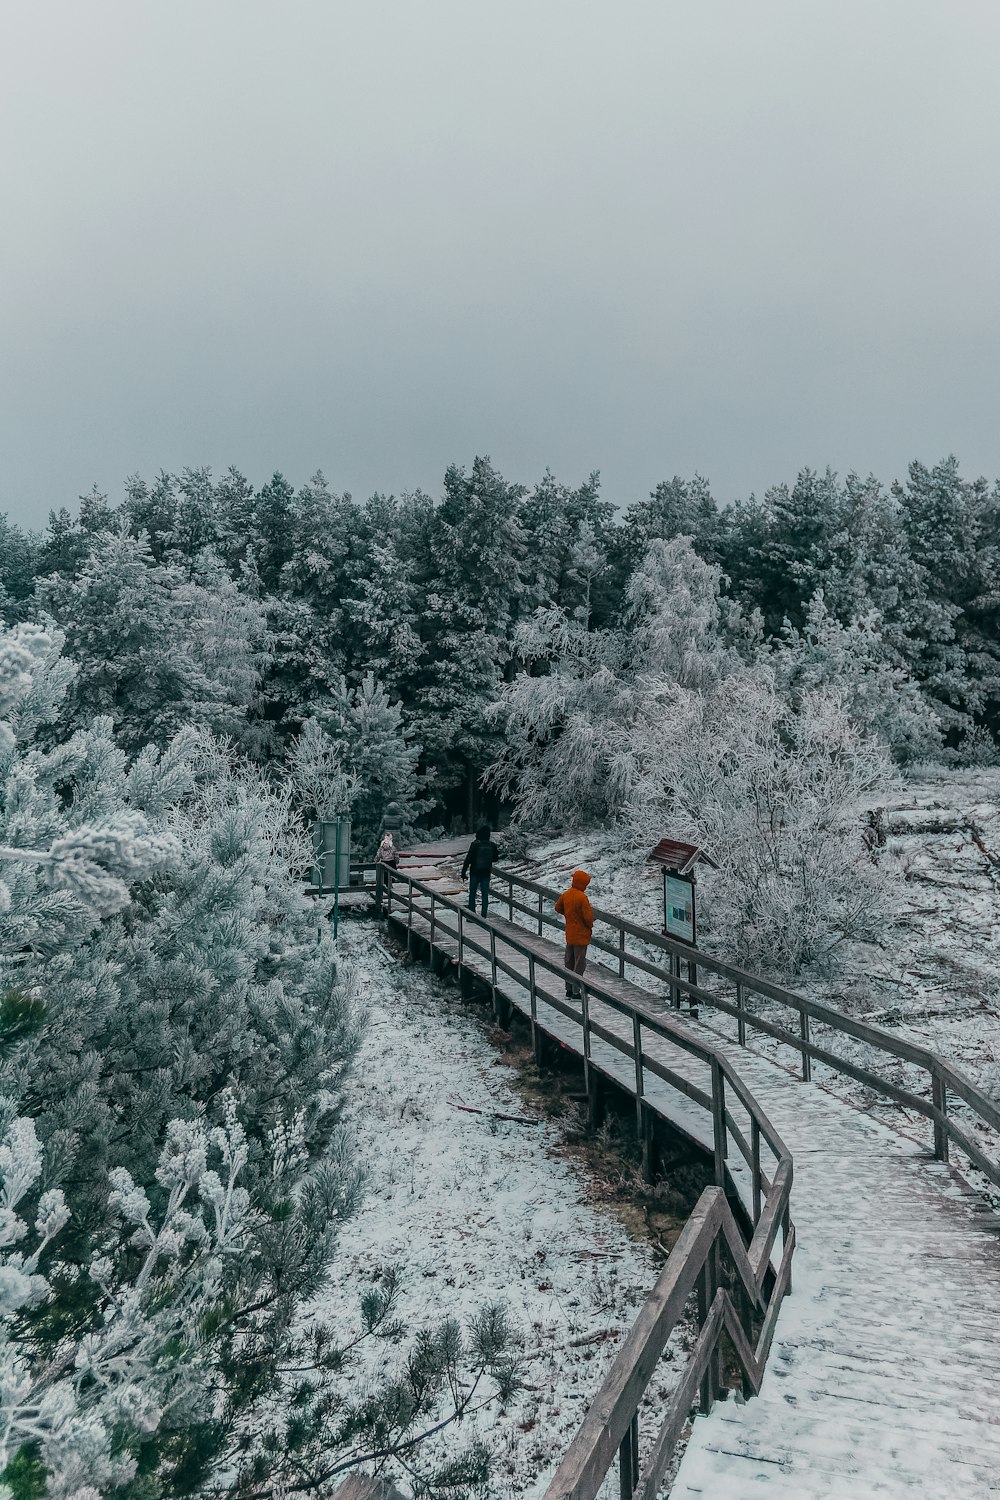 a person walking on a bridge over a snowy forest